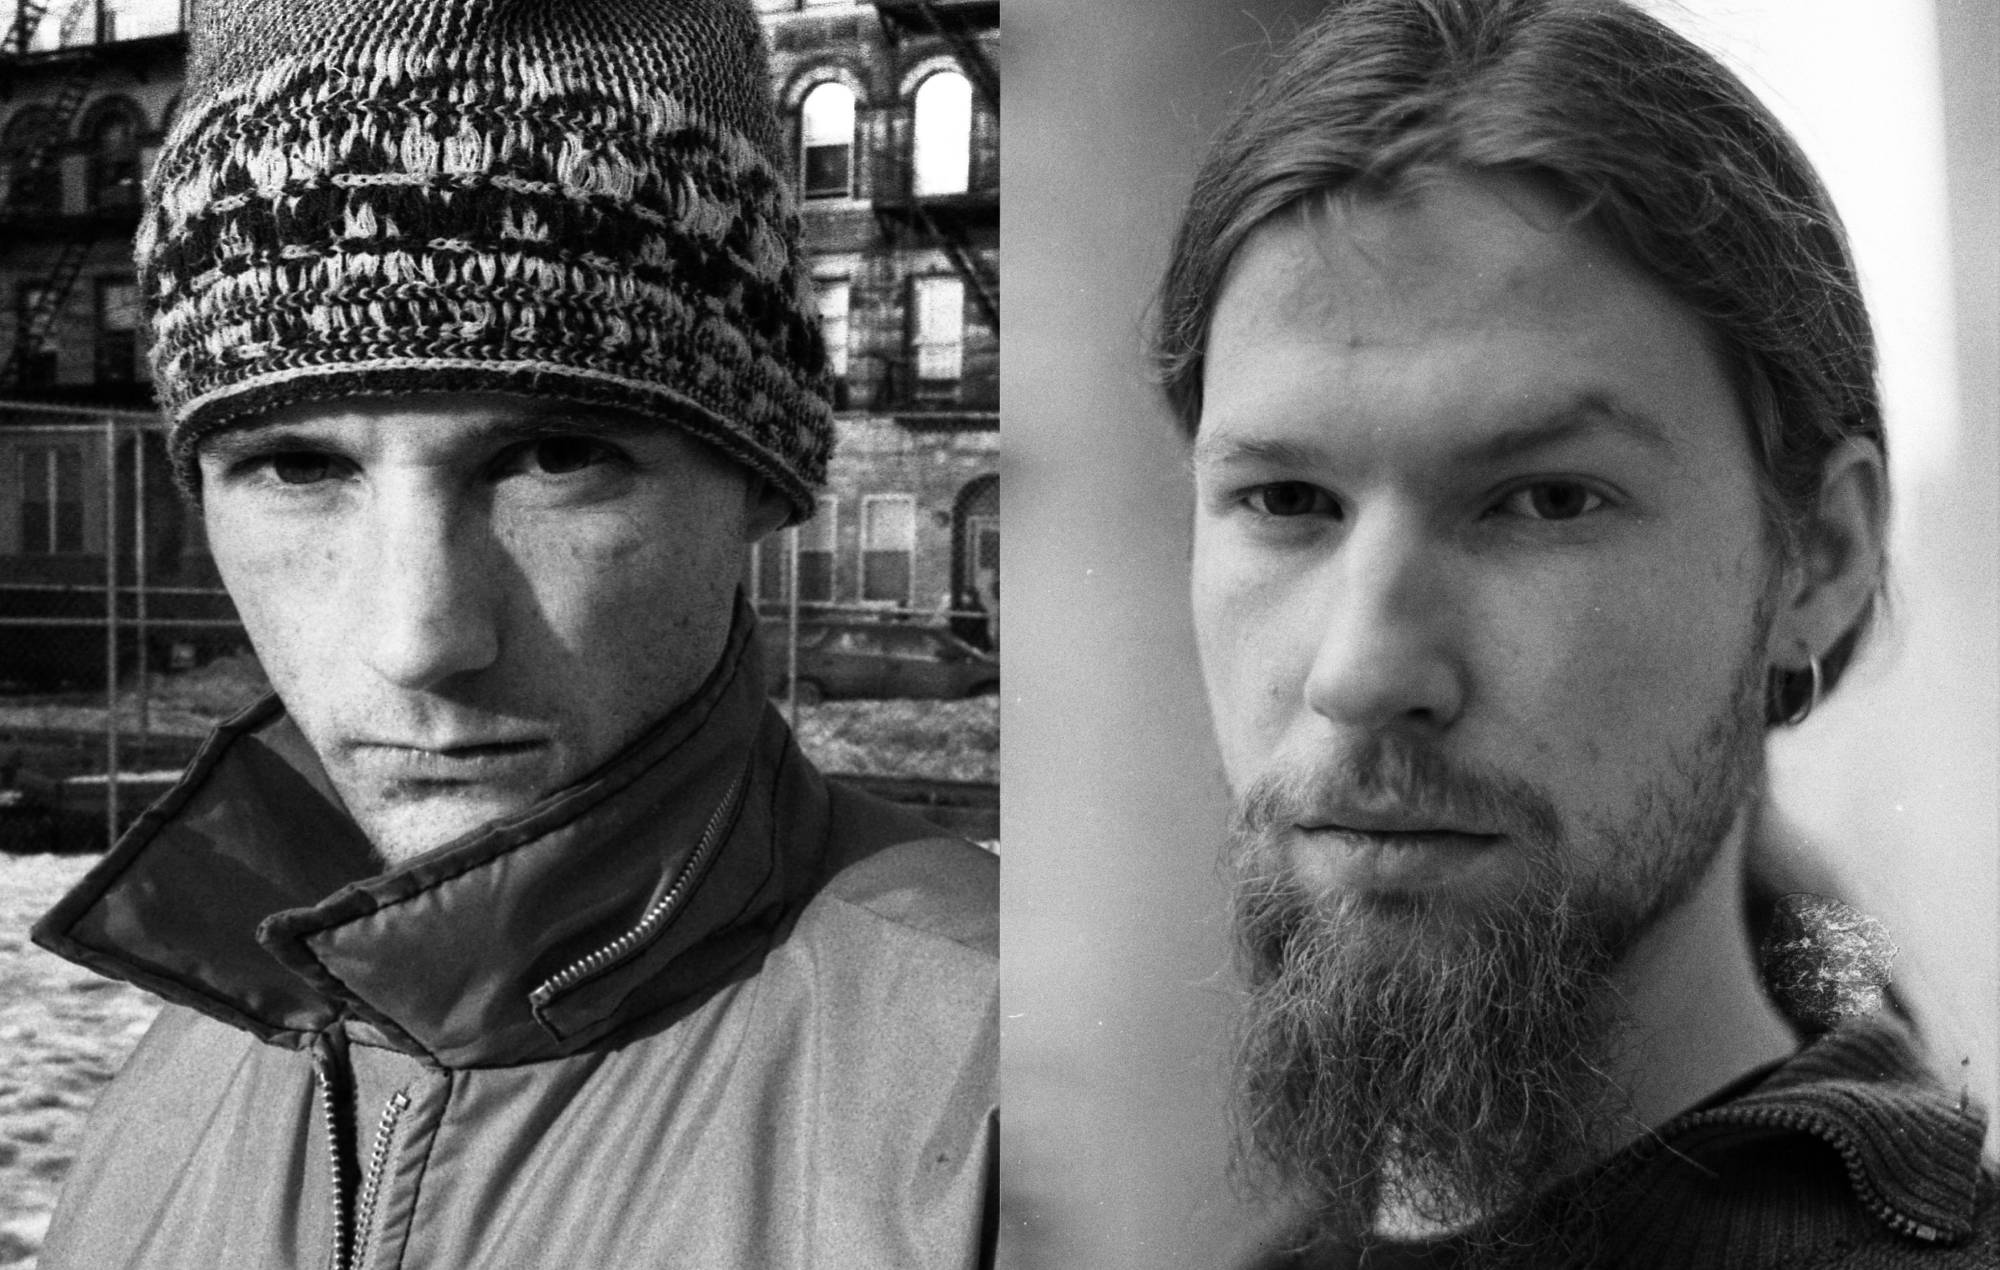 Moby says “there was a sadness” to his feud with Aphex Twin